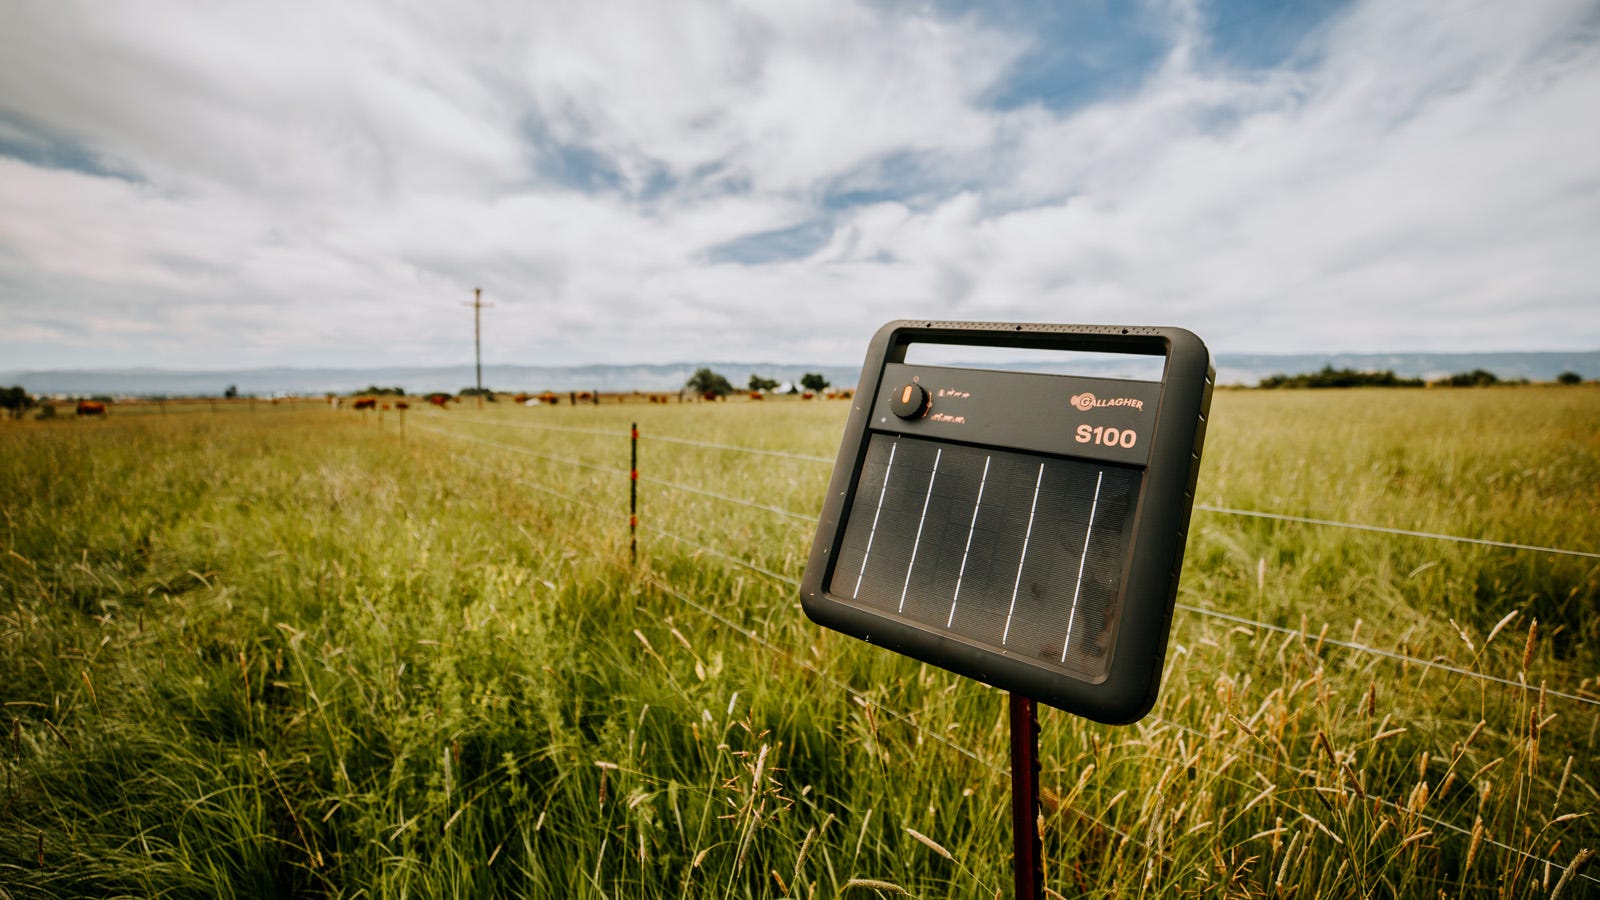 A Gallagher s100 energizer on post in a field with tall green grass